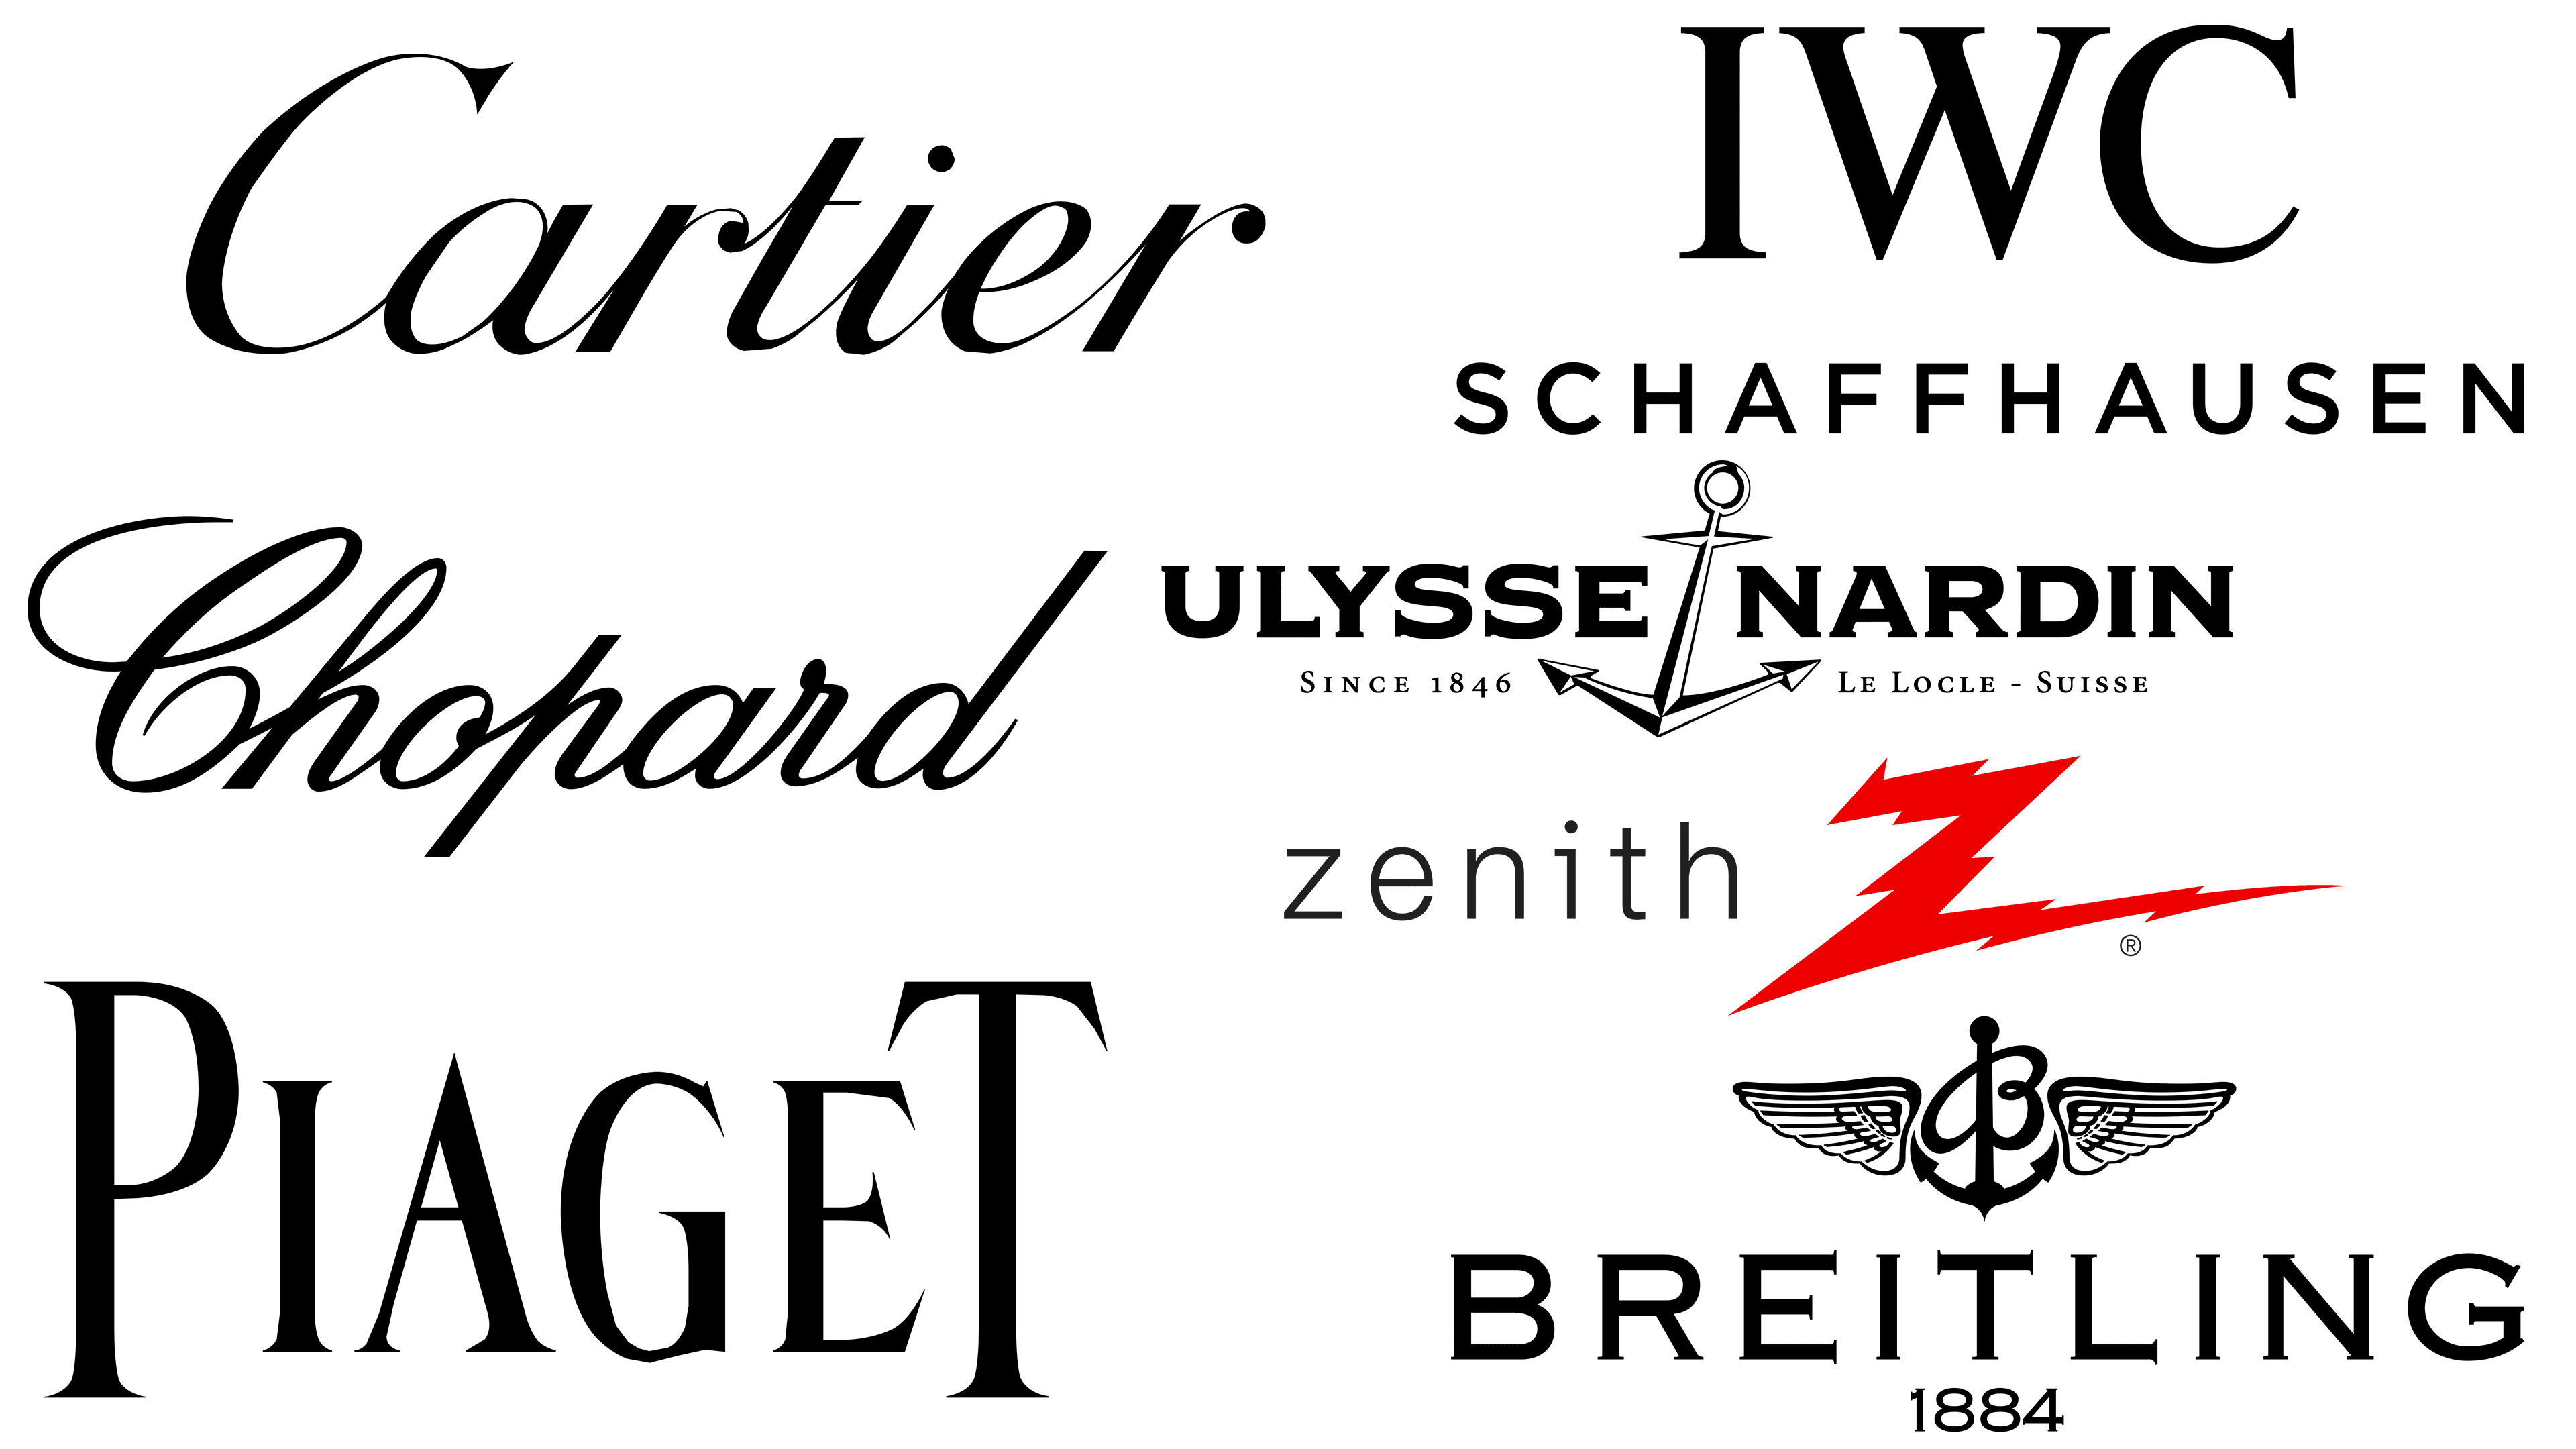 Watch Brands Logos Of Swiss, Japanese & Other Famous Brands